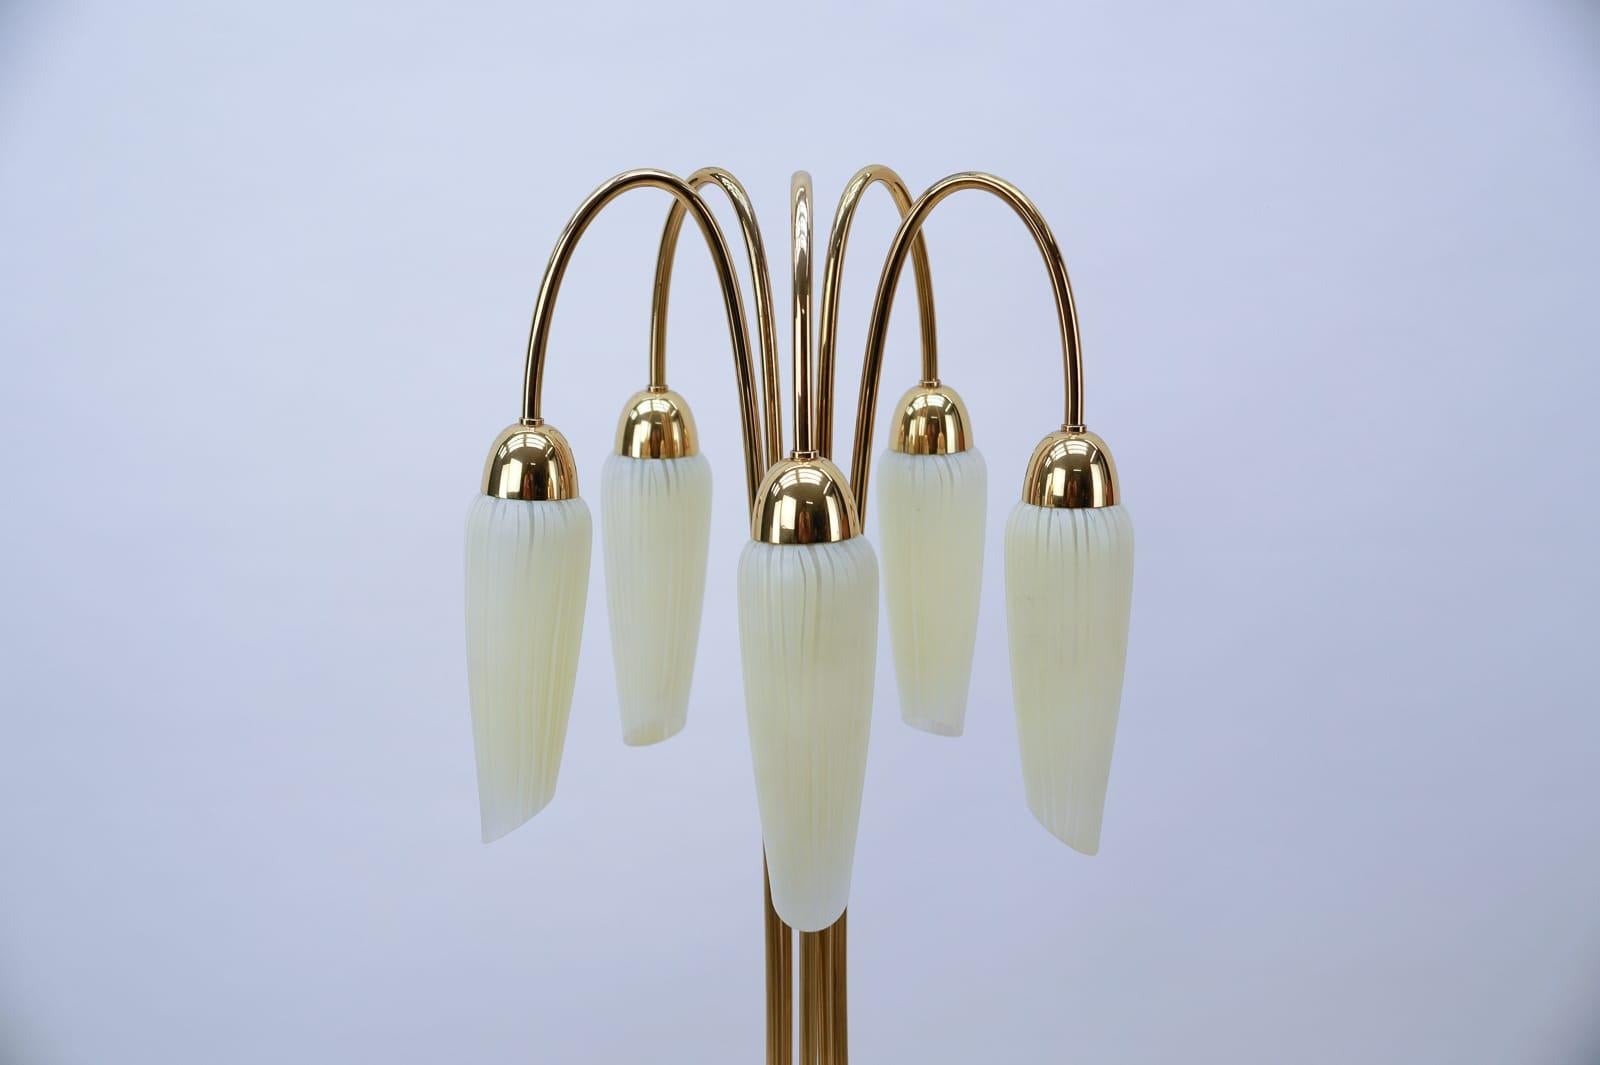 Very Rare Mid-Century Modern Floor Lamp with Five Glass Shades, 1950s Italy In Good Condition For Sale In Nürnberg, Bayern